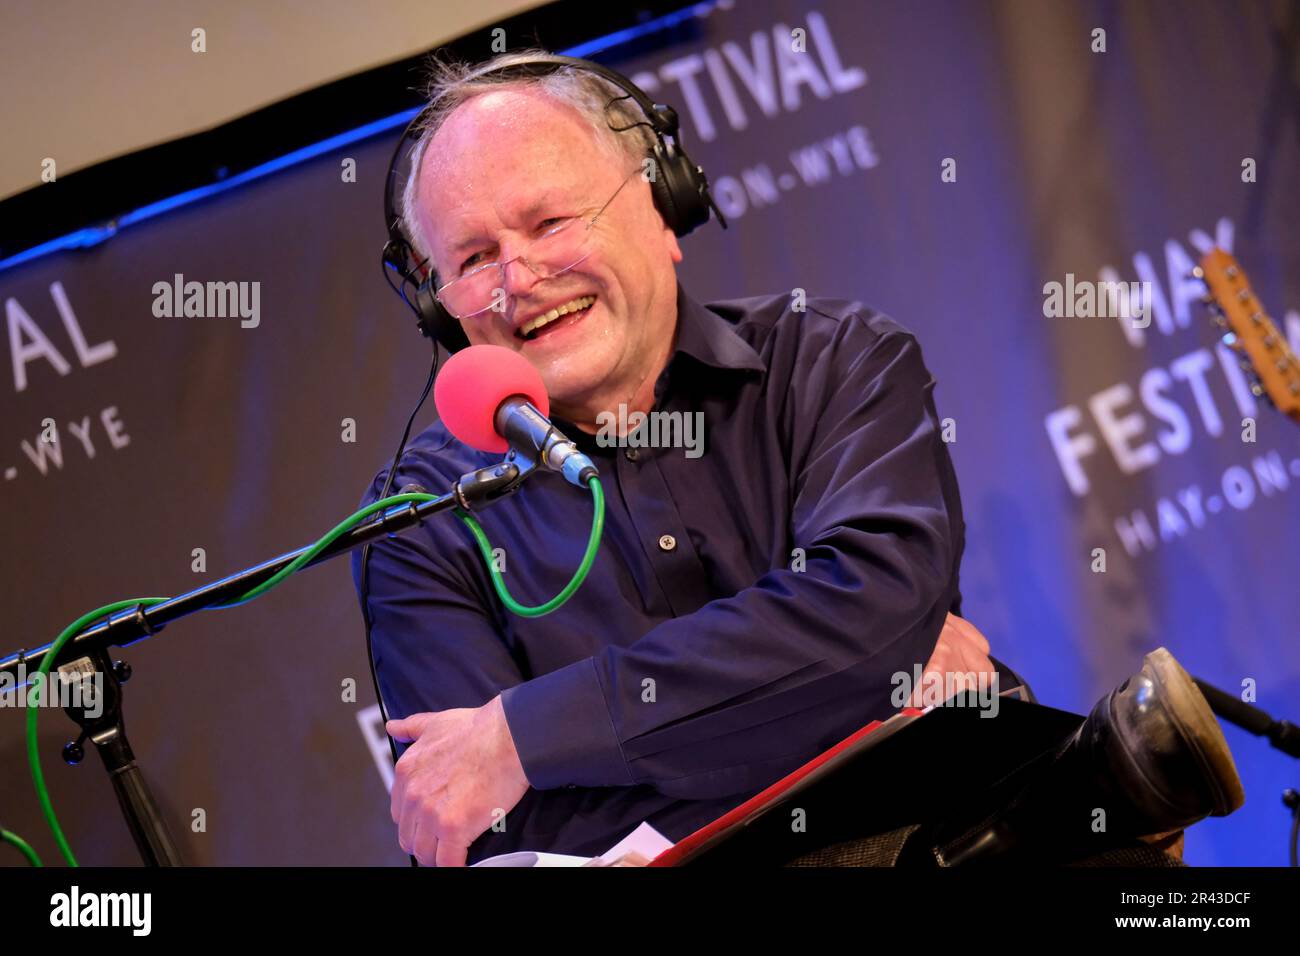 Hay-on-Wye, Herefordshire, UK Thursday 25 May 2023, 5pm Venue: Llwyfan Cymru – Wales Stage BBC Radio 4 Loose Ends producers Clive Anderson and Andrew O’Neill bring the chat and laughs of Radio 4’s top entertainment show to the Hay Festival. Guests are Simon Day, Maggie Aderin-Pocock, Joseph Coelho and Dr Ranj, with music from Panic Shack.Credit: Ian Tennant/Alamy Live News  Stock Photo